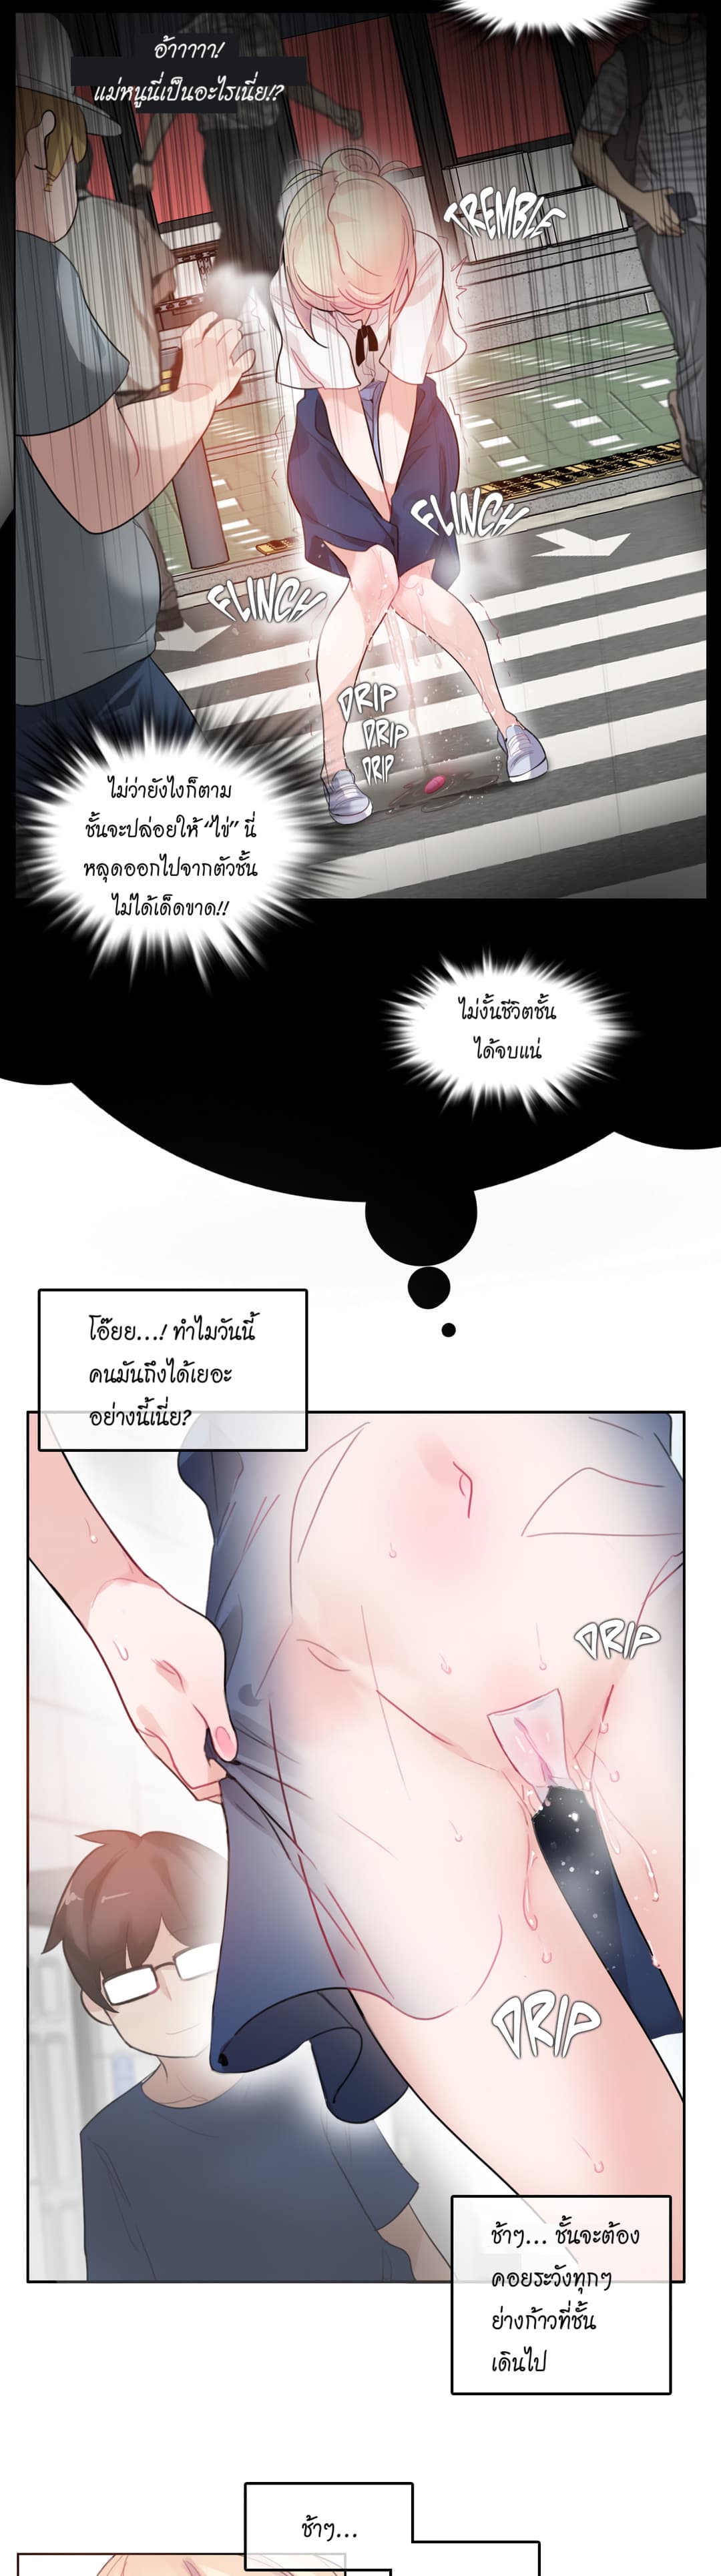 A Pervert’s Daily Life 35 (9)